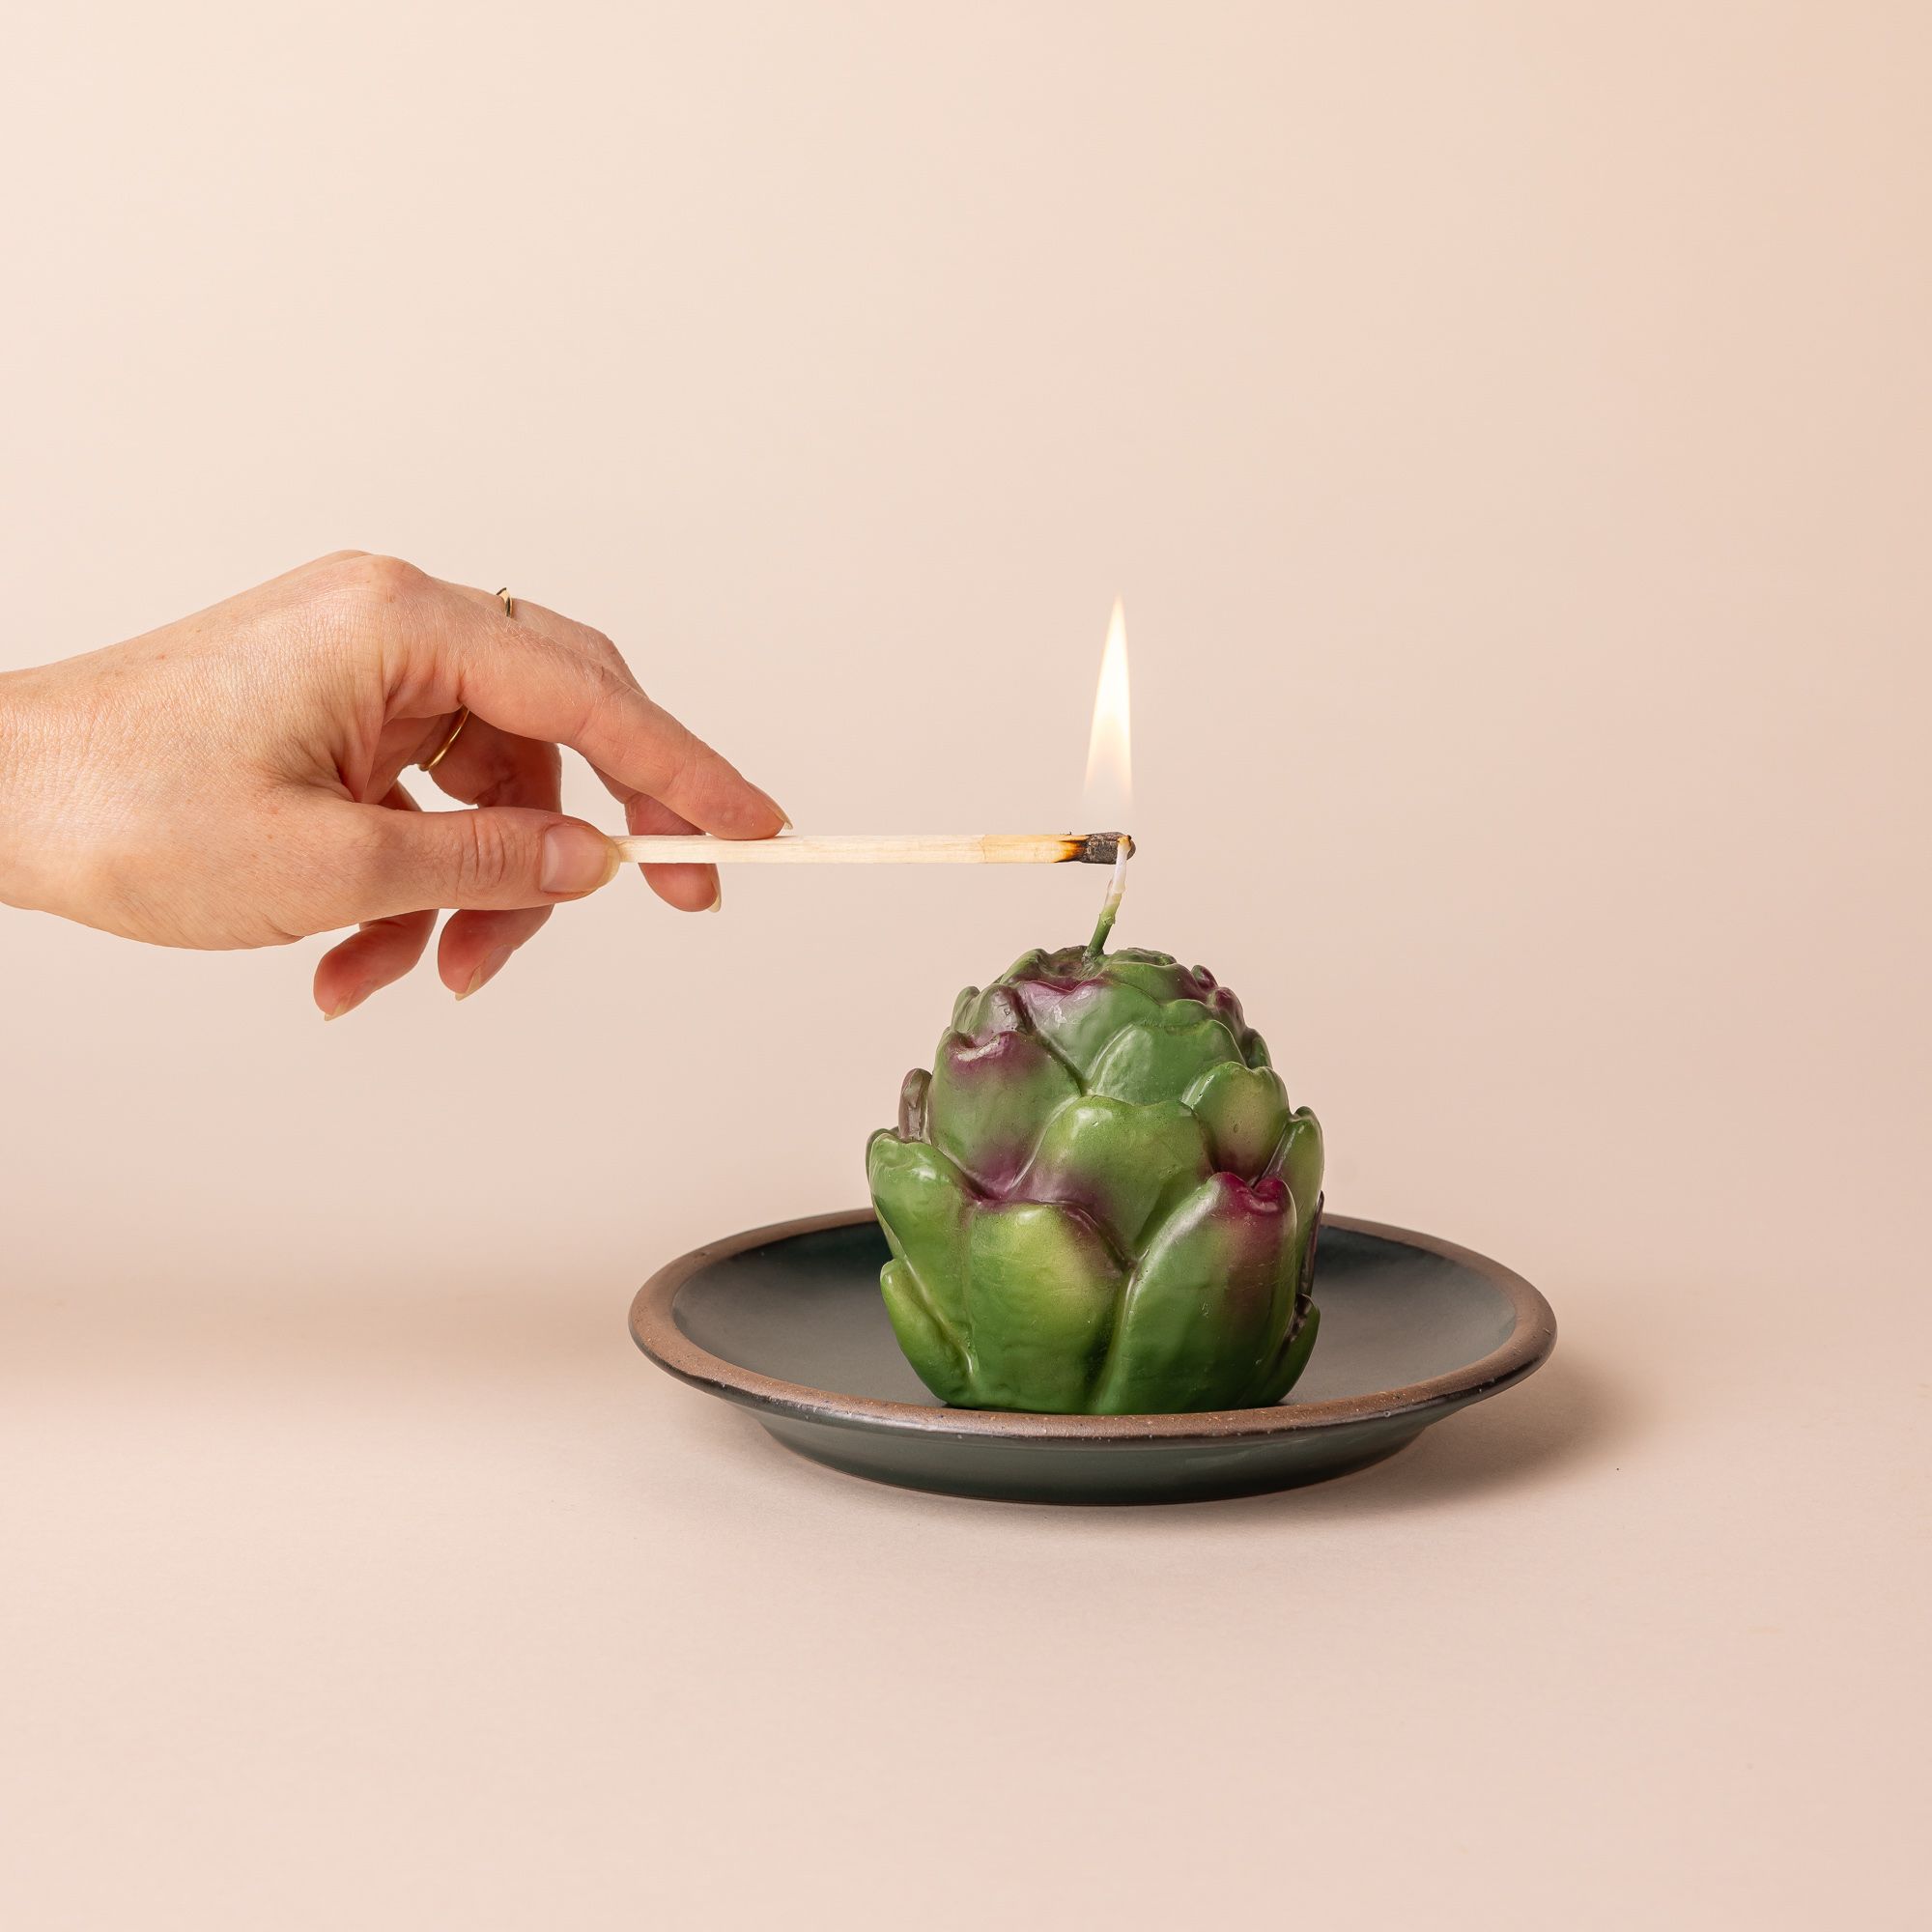 An artichoke candle with a burning flame sits on a small plate. A hand has a lit match igniting the flame.